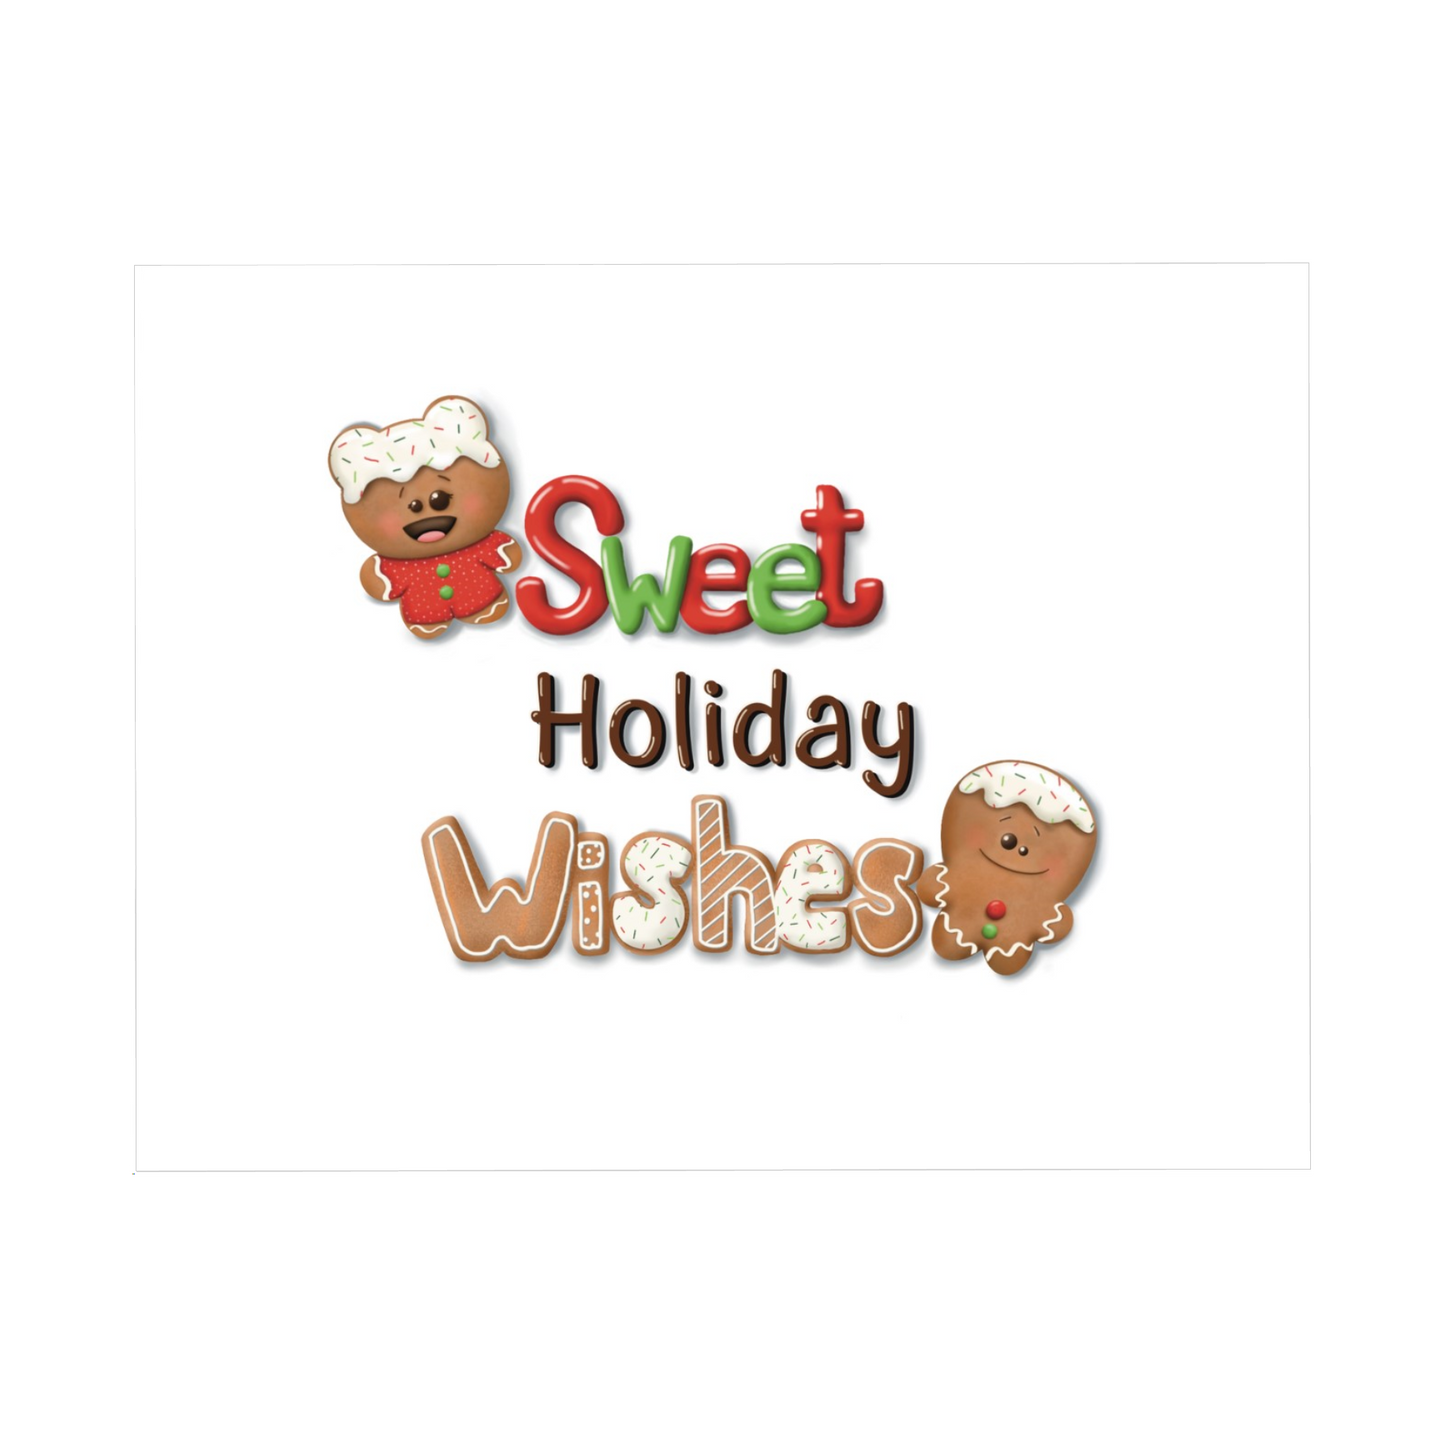 Sweet Holiday Wishes